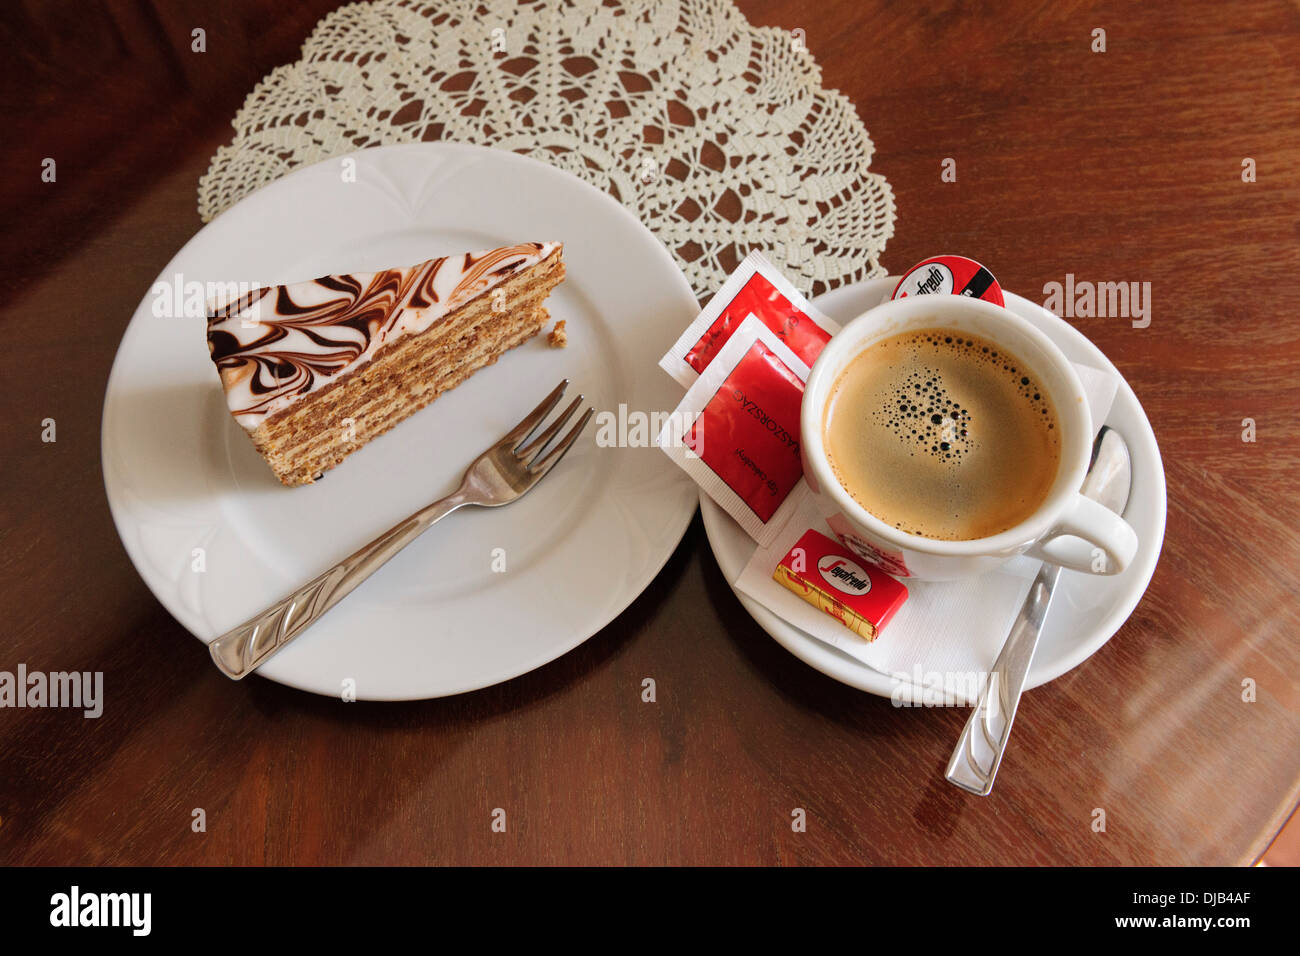 Piece of cake and cup of coffee, Ruszwurm cafe, Budapest, Hungary Stock Photo